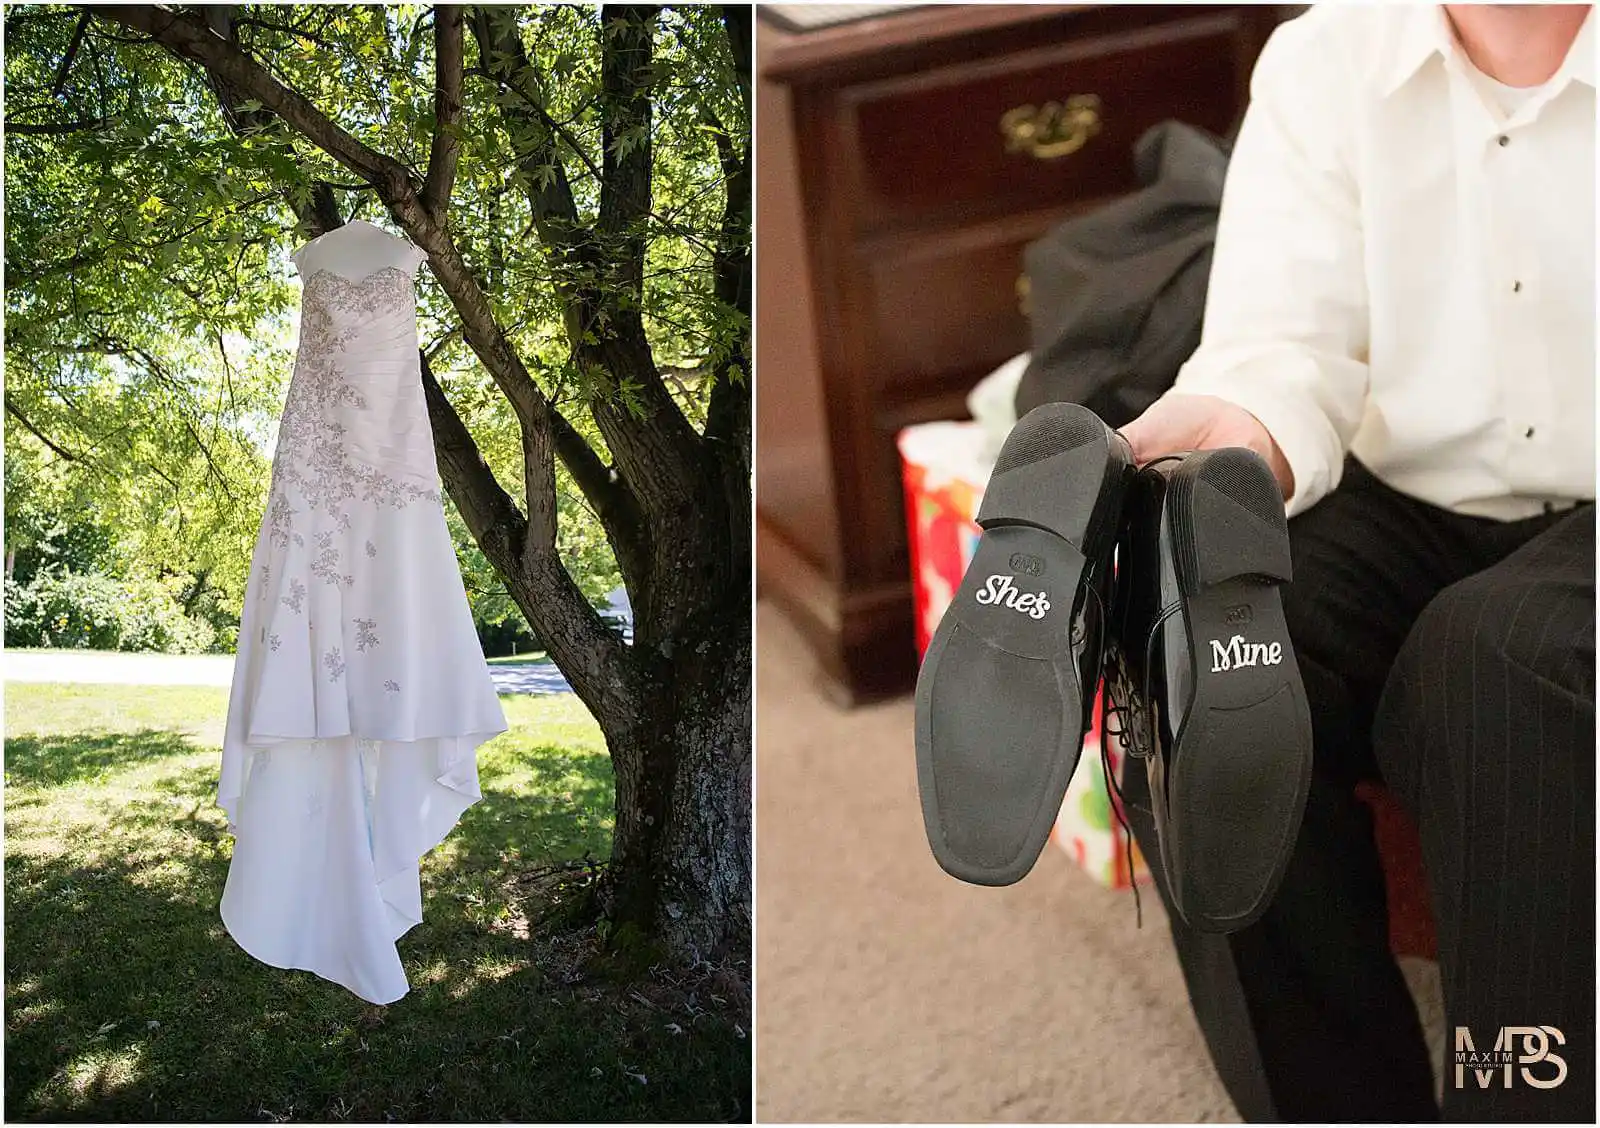 Elegant wedding dress hanging on a tree and grooms shoes with Shes Mine lettering.